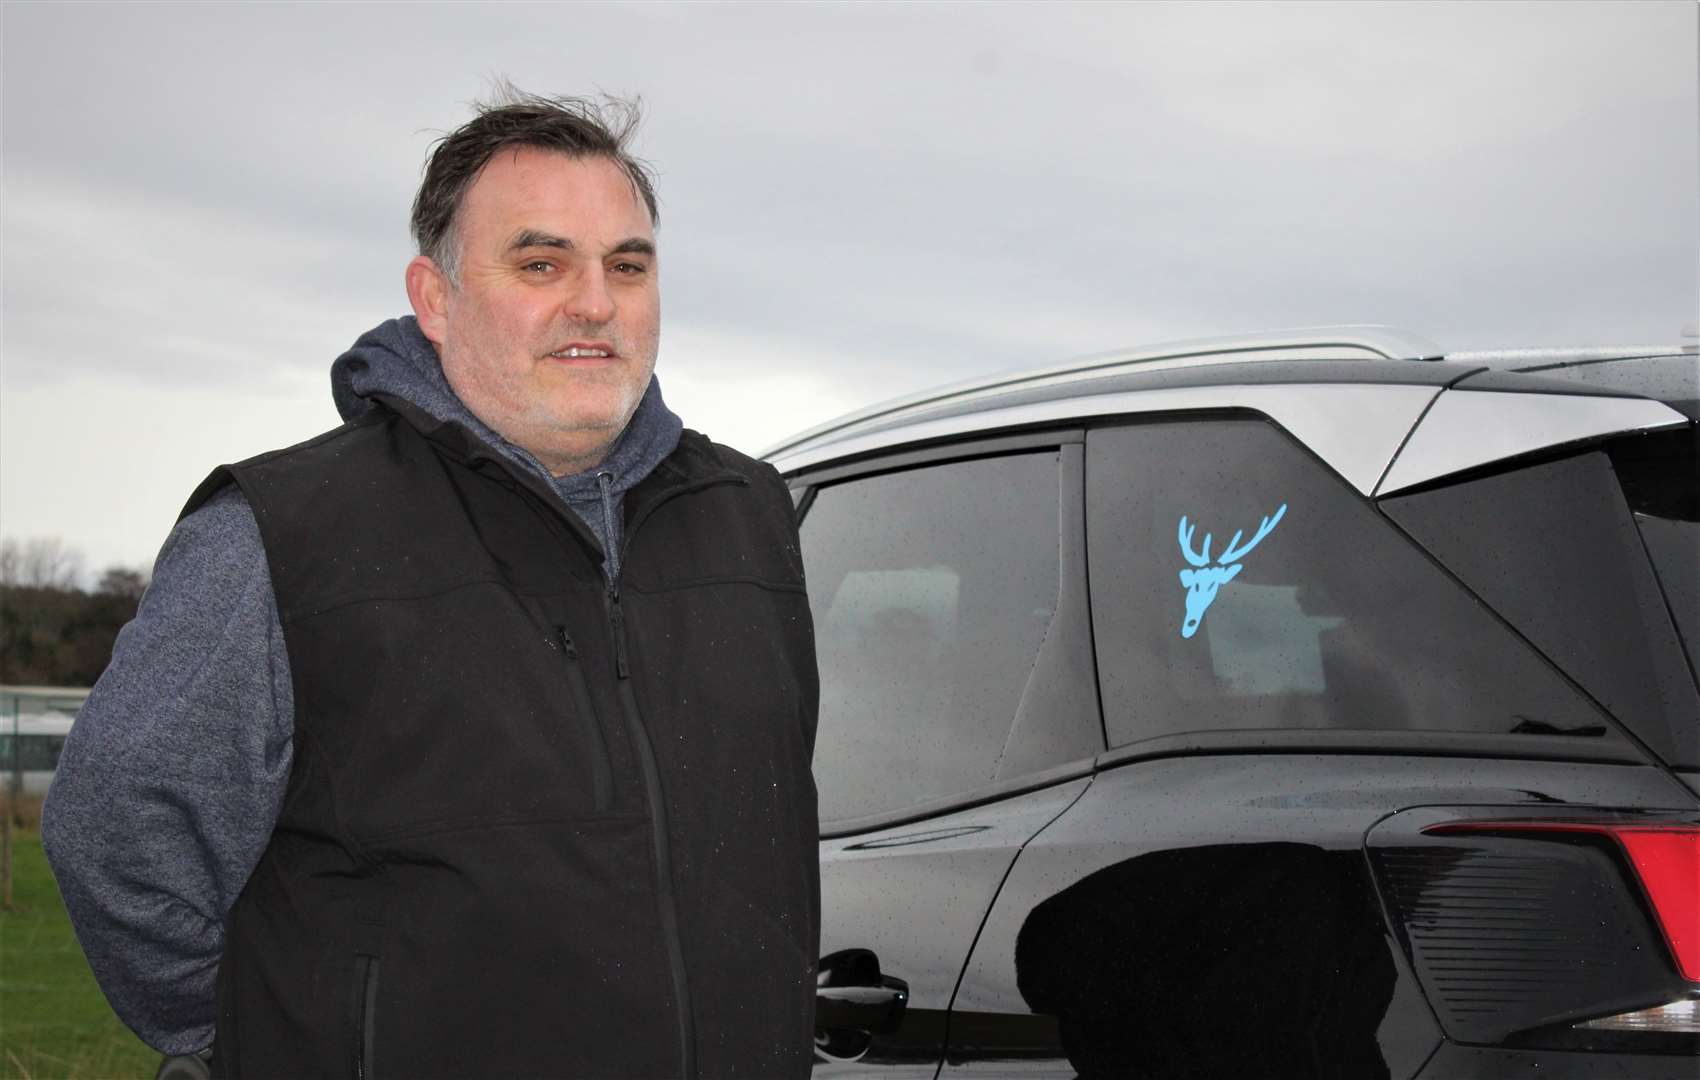 David Purvis of DP Taxis in Tain has been nominated for an award at this year's Scottish Taxi, Private Hire & Chauffeur Awards